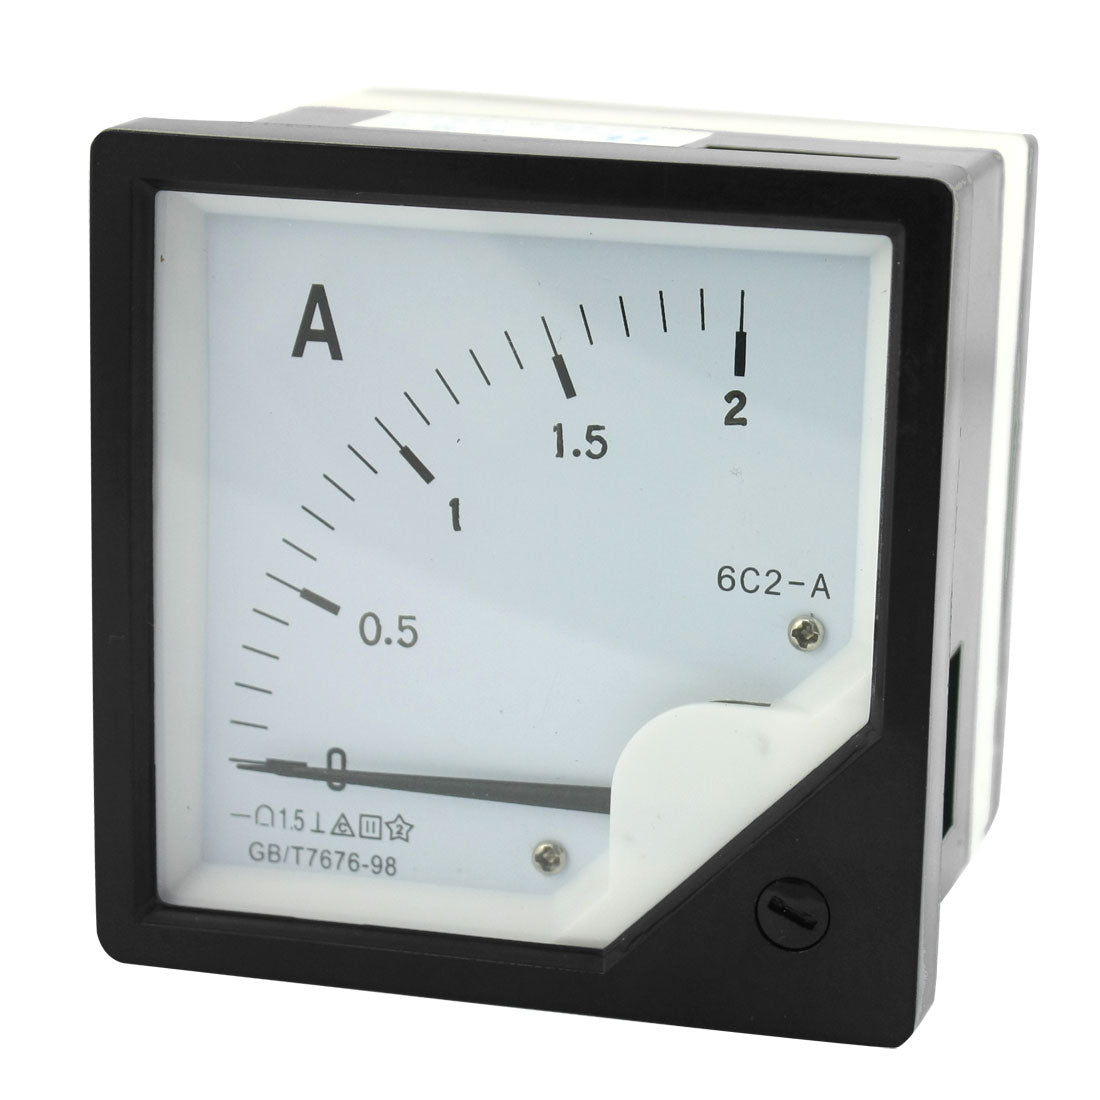 uxcell Uxcell DC 0-2A Measuring Range Class 1.5 Current Testing Rectangle Plastic Panel Analog Meter Amperemeter 6C2